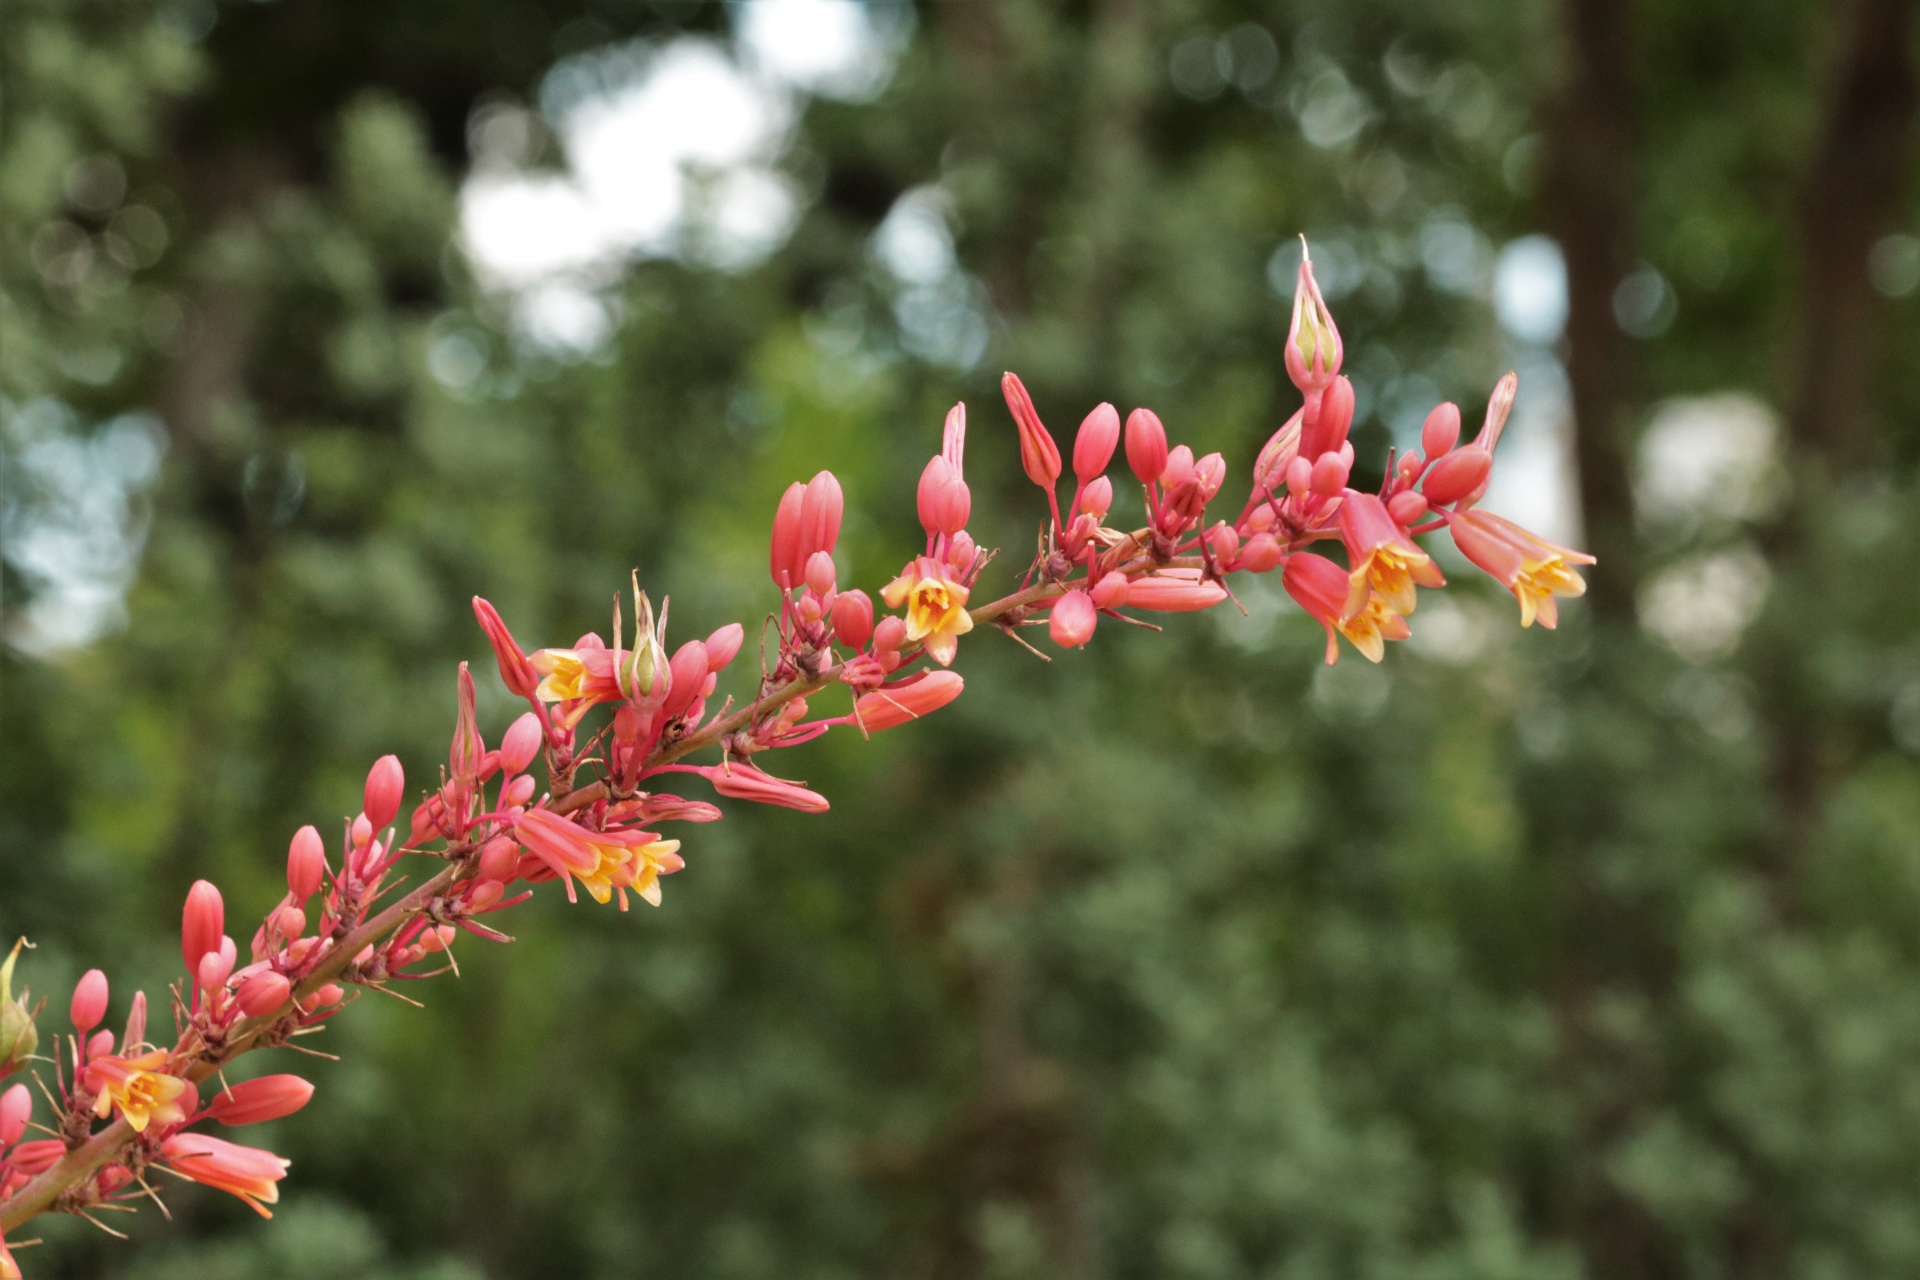 Close-up of the pink and yellow blooms on the stem of a red yucca plant, on a blurred green background.